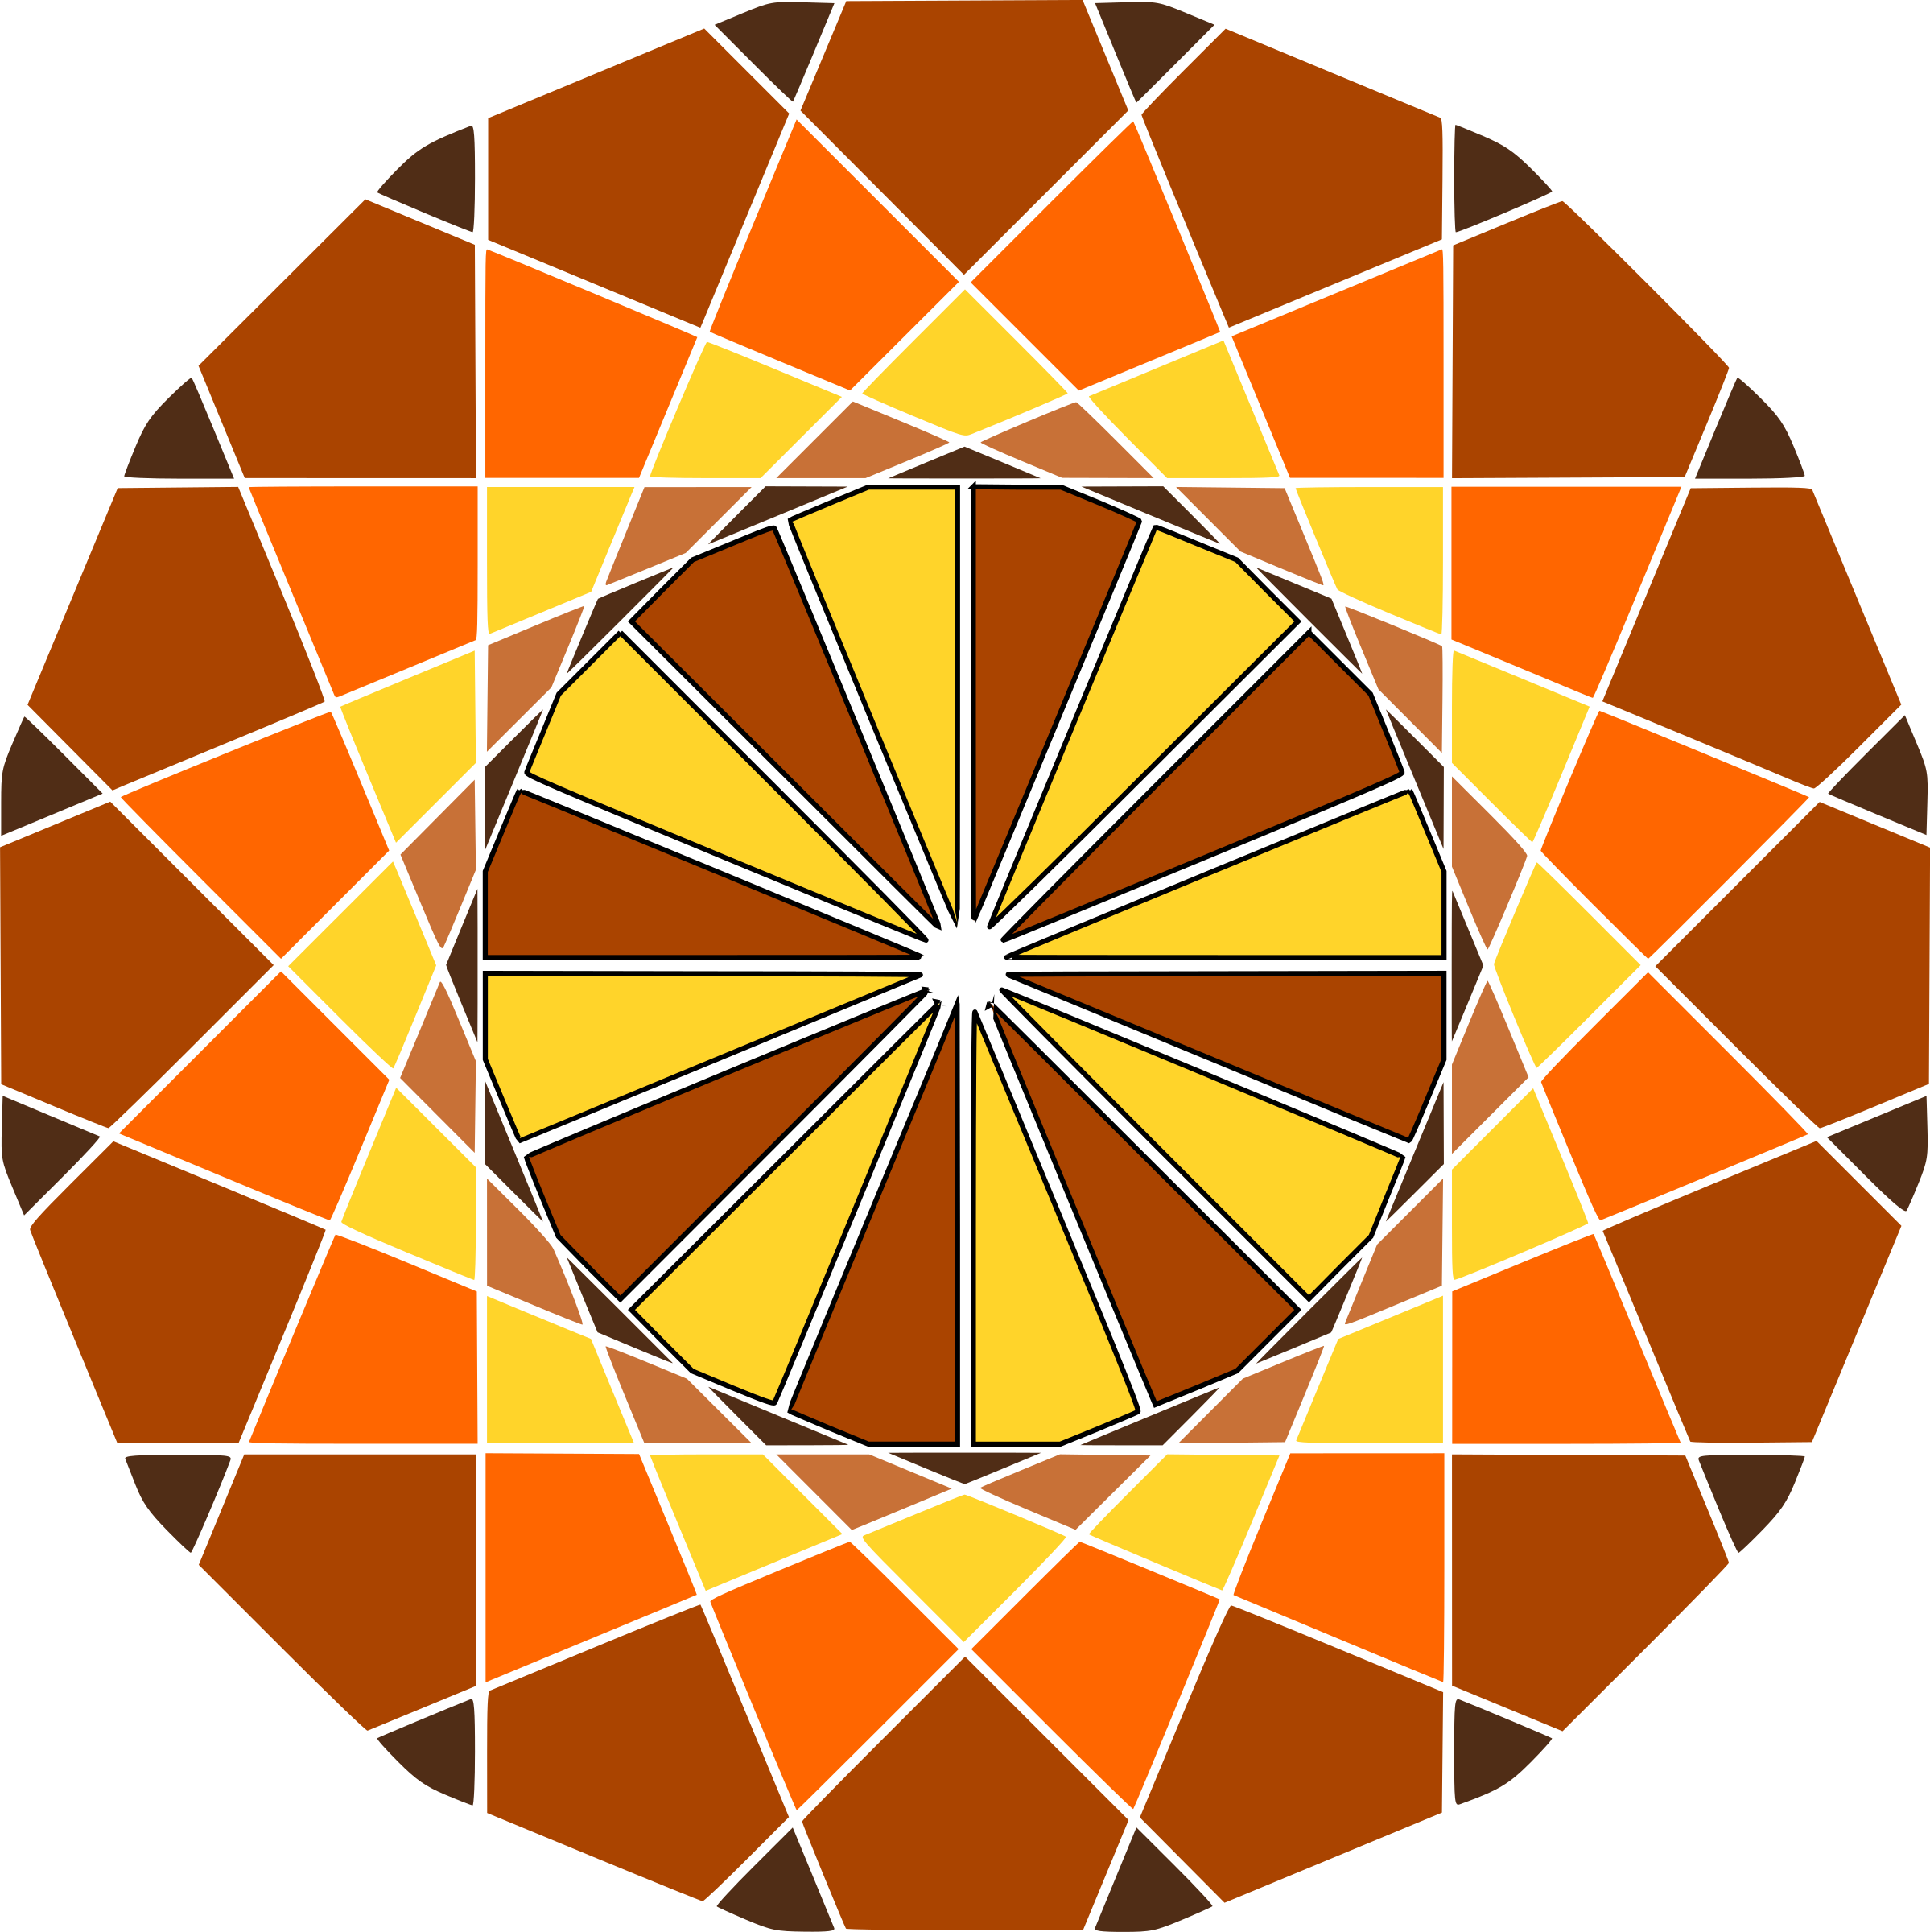 A Circular Pattern With Many Triangles